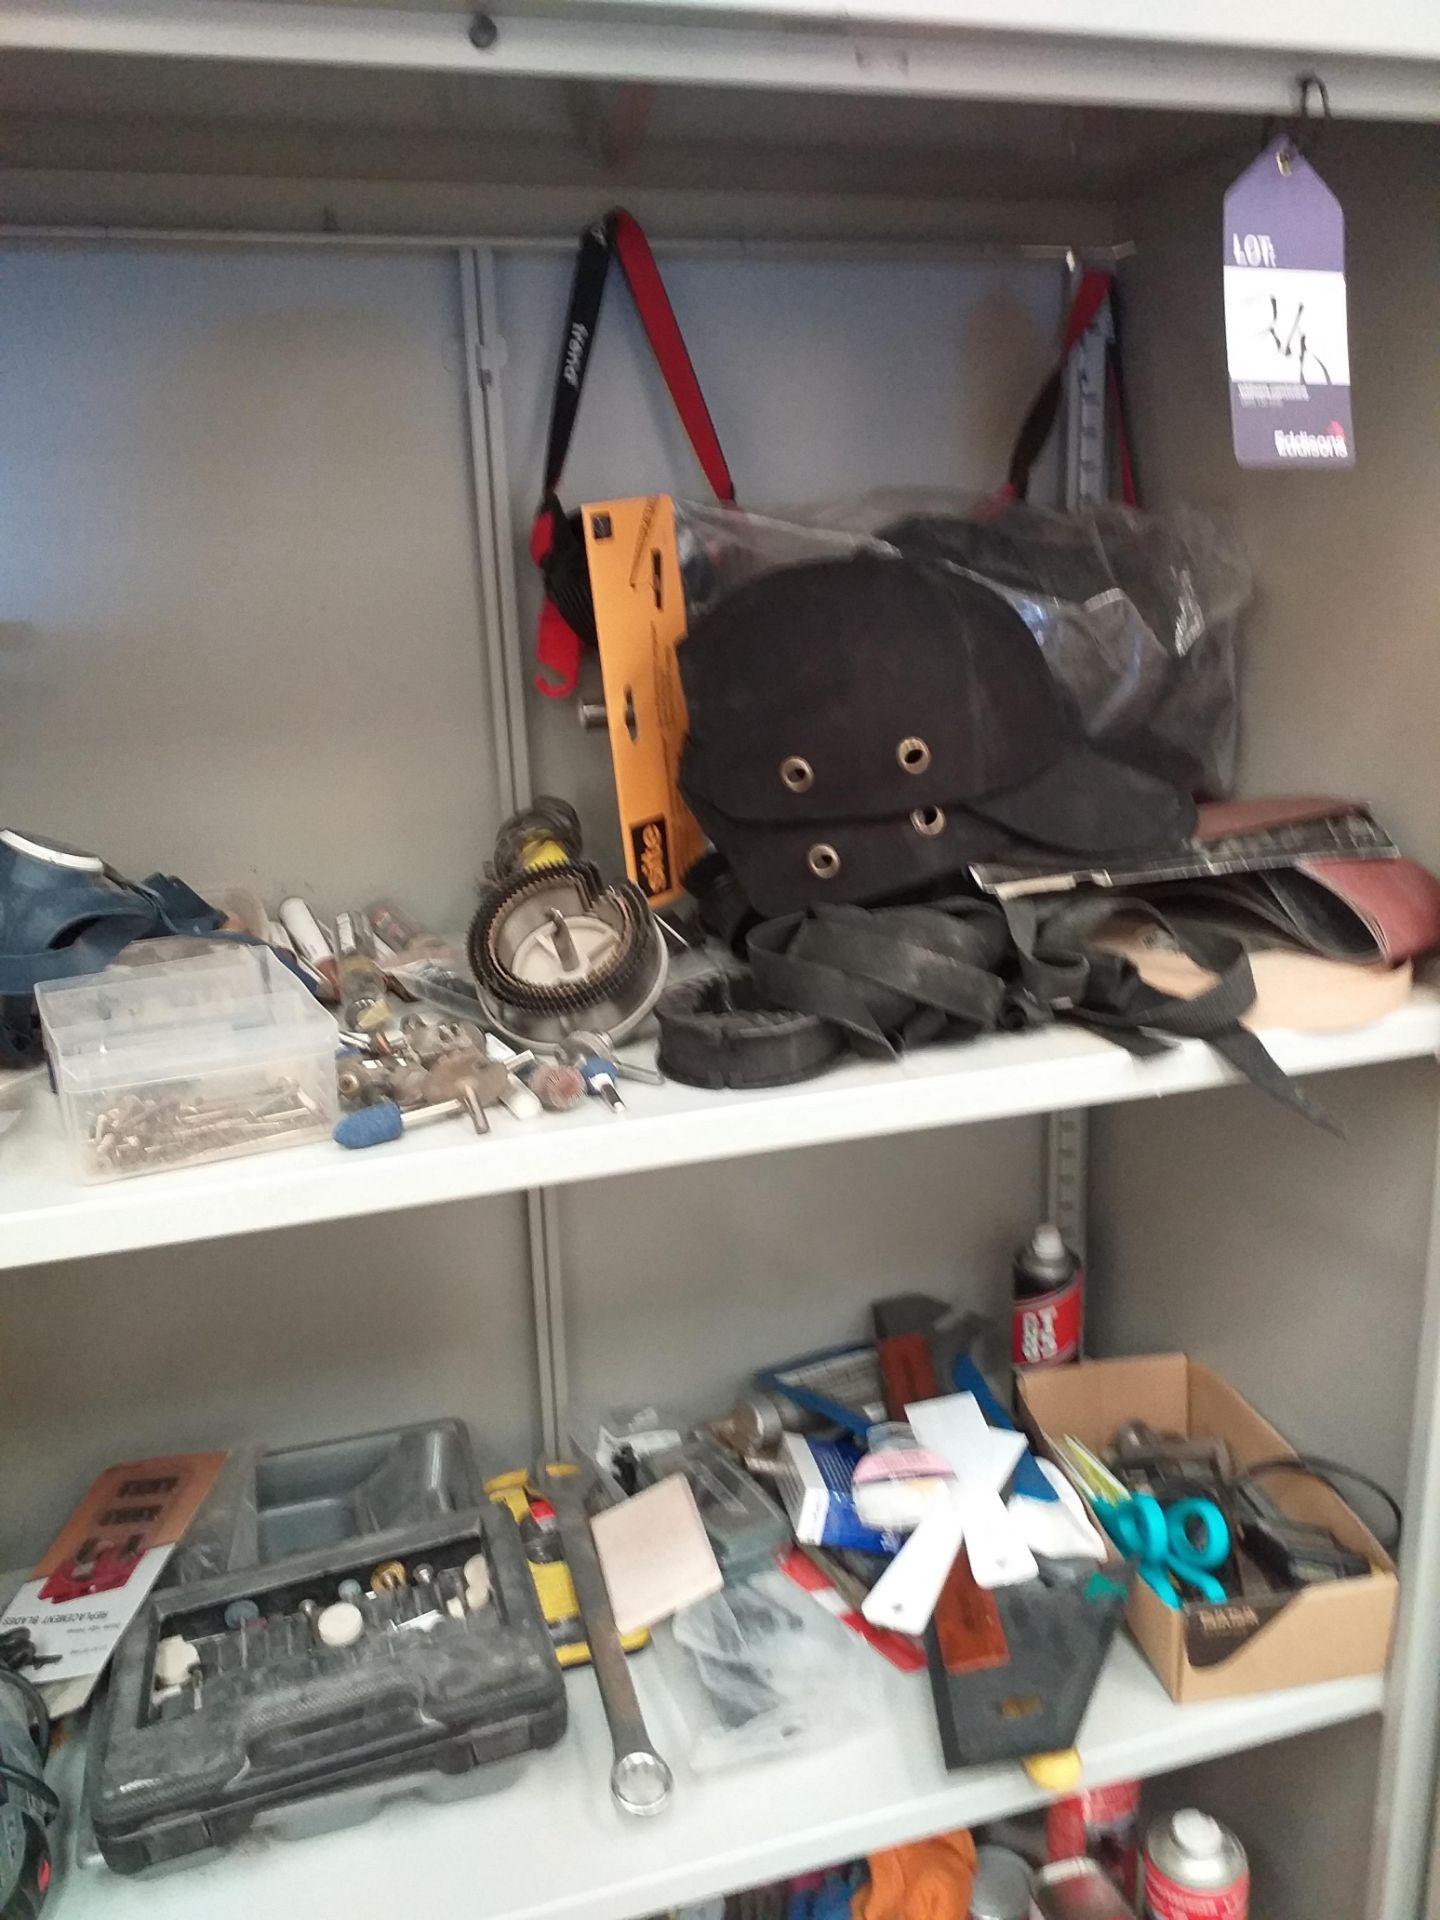 Steel Cupboard & Contents of Various Hand tools Safety Wear etc.